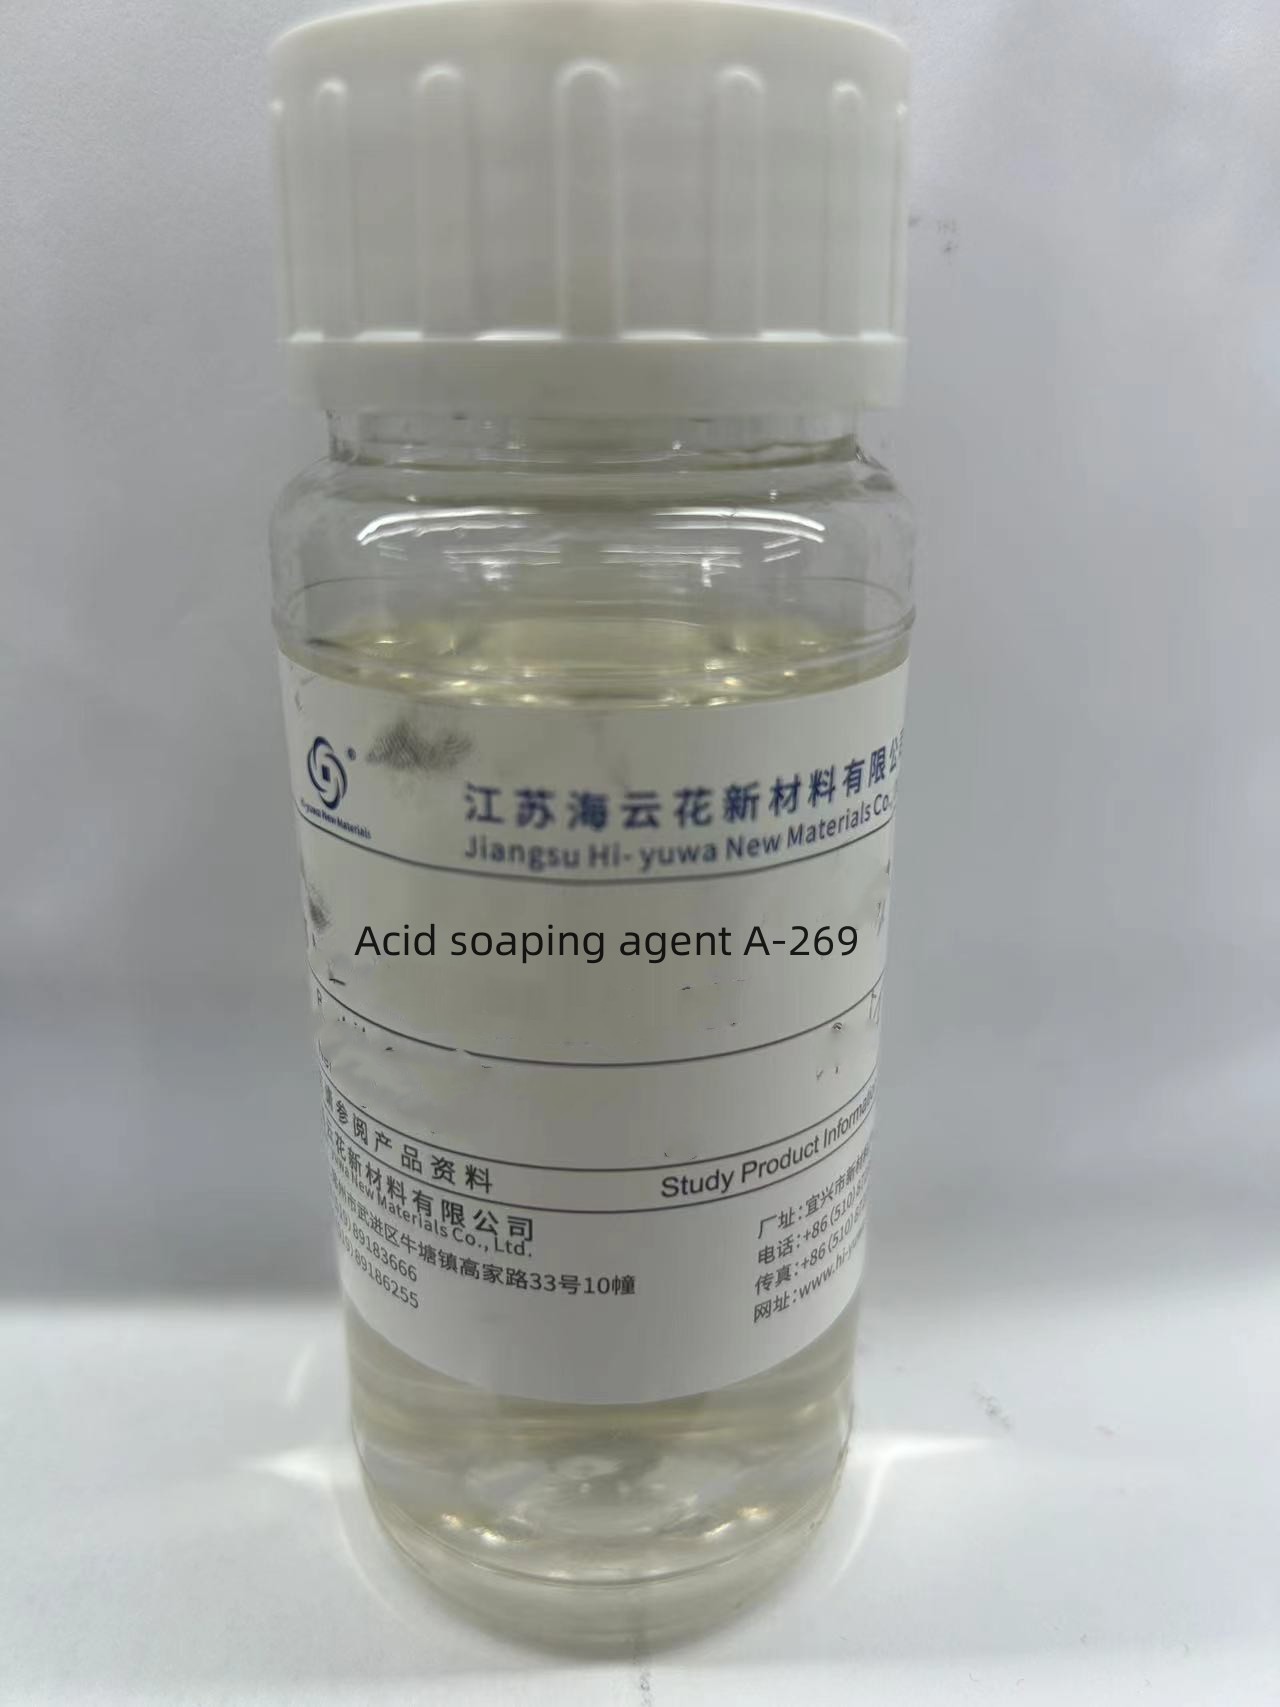 Acid soaping agent A-269